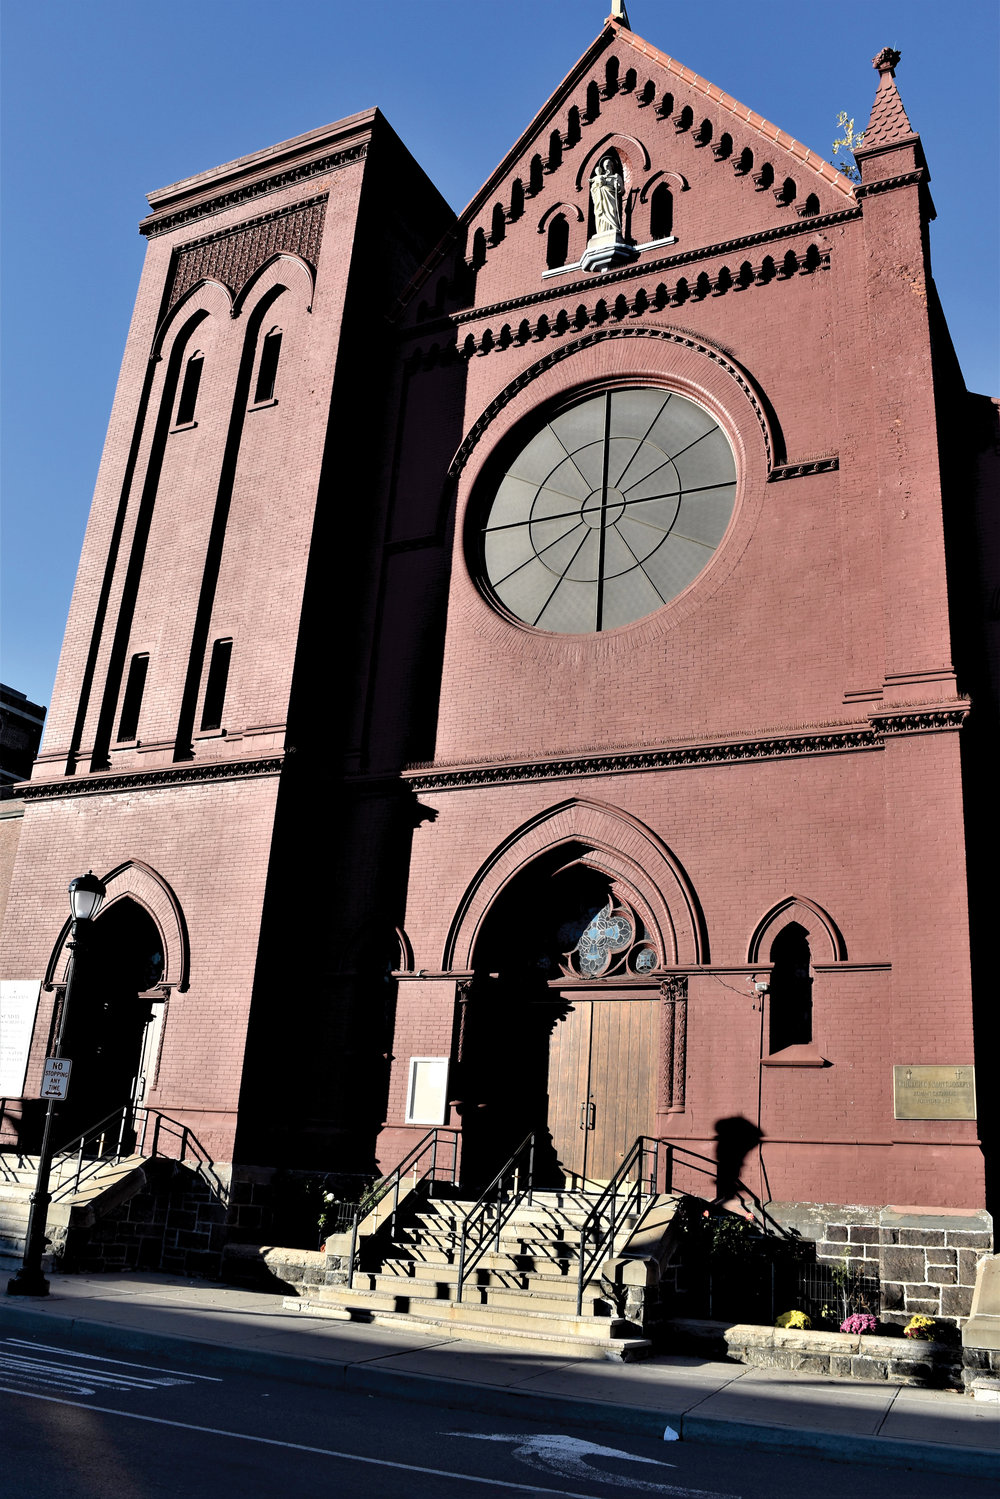 St. Joseph’s Church was dedicated by Archbishop Michael Corrigan in 1888 for the Yonkers parish established in 1871.